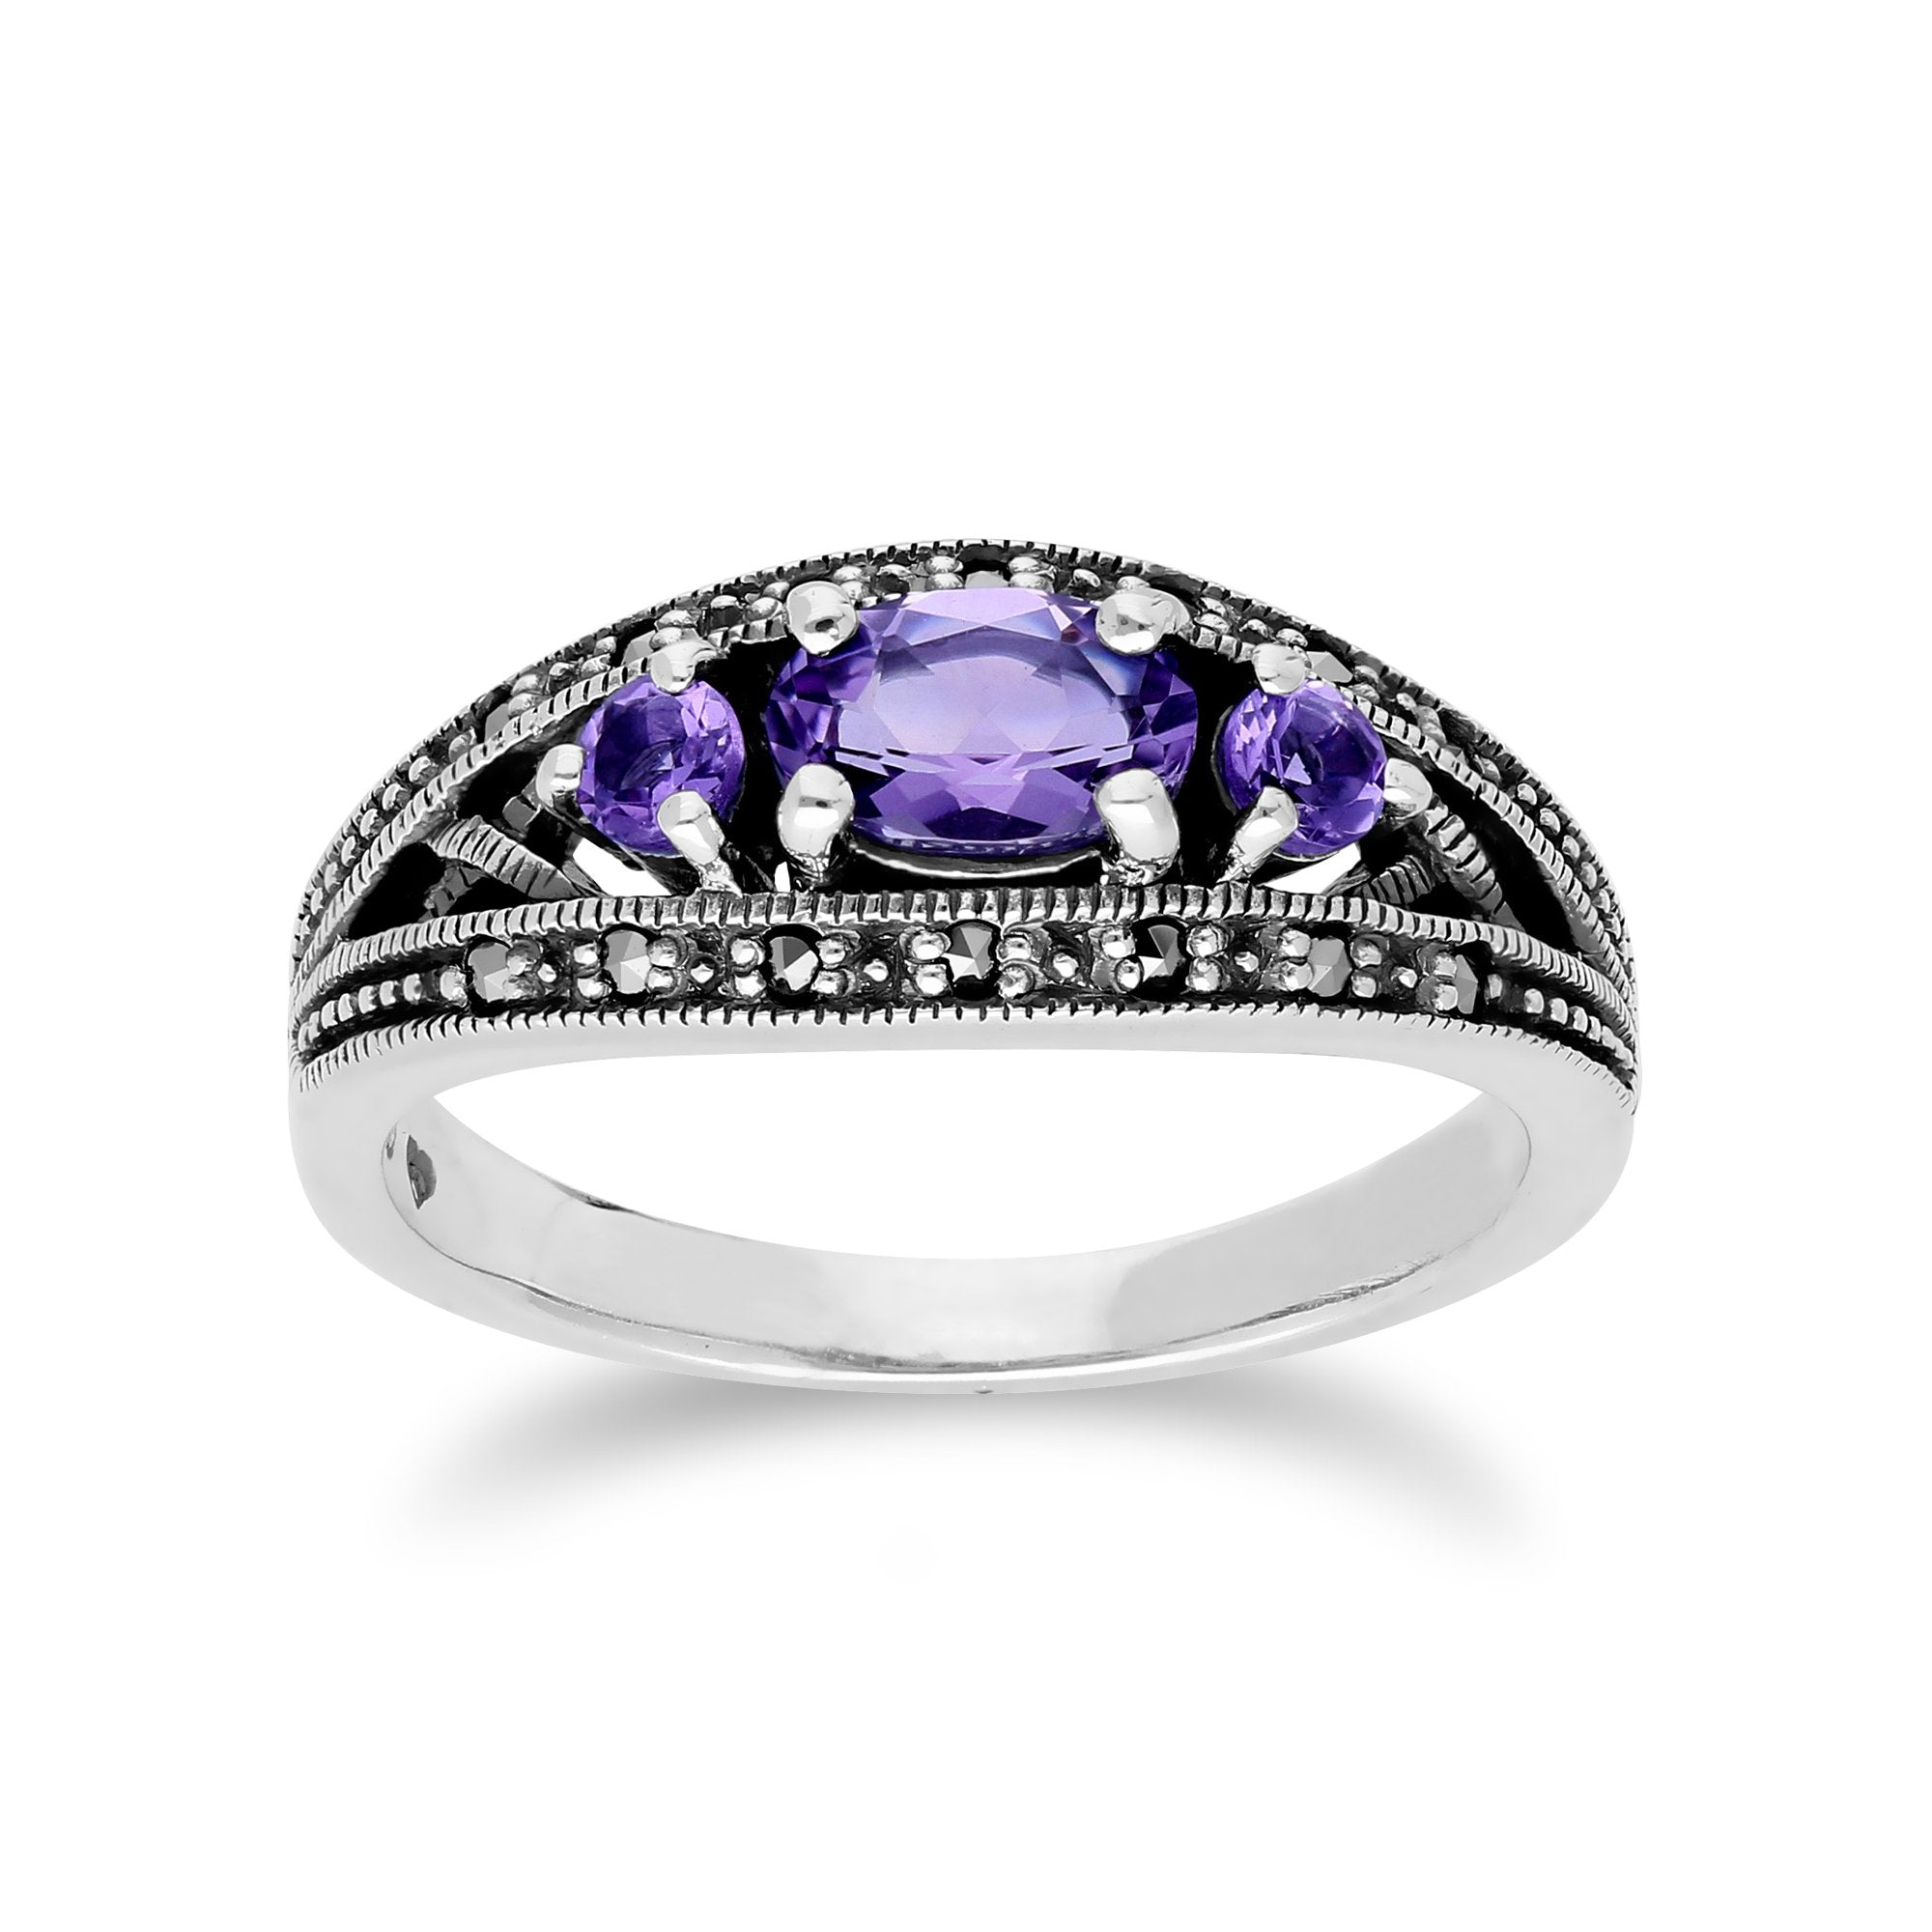 Art Deco Style Oval Amethyst & Marcasite Three Stone Ring in 925 Sterling Silver